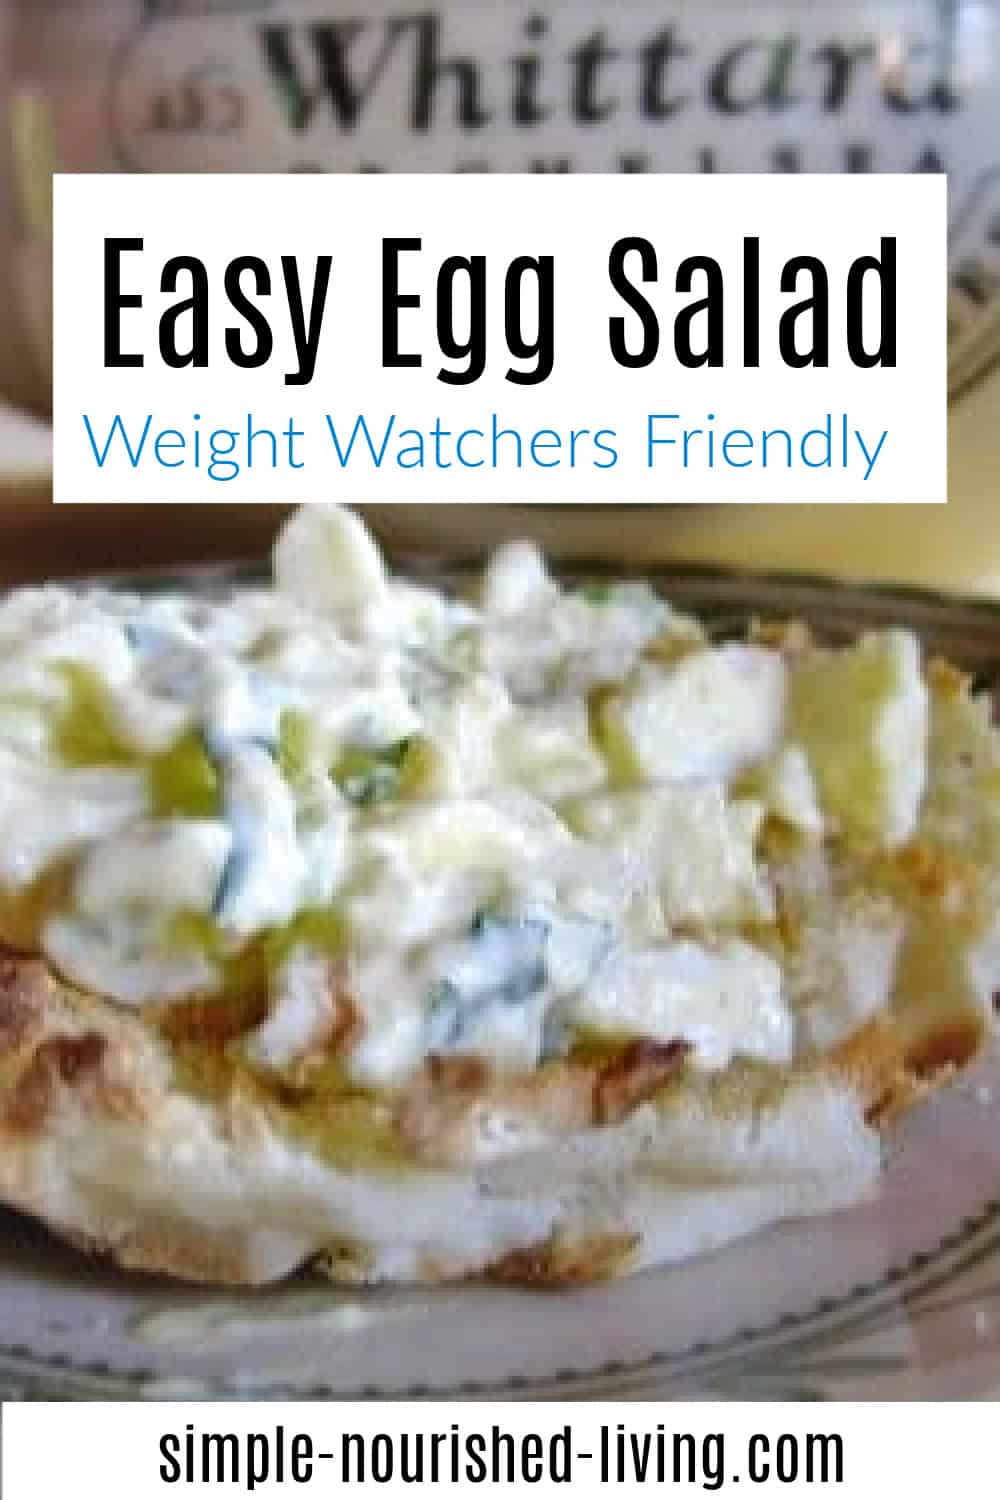 egg salad on english muffin with Whittard tea pot behind with Text Box " Easy Egg Salad - Weight Watchers Friendly"